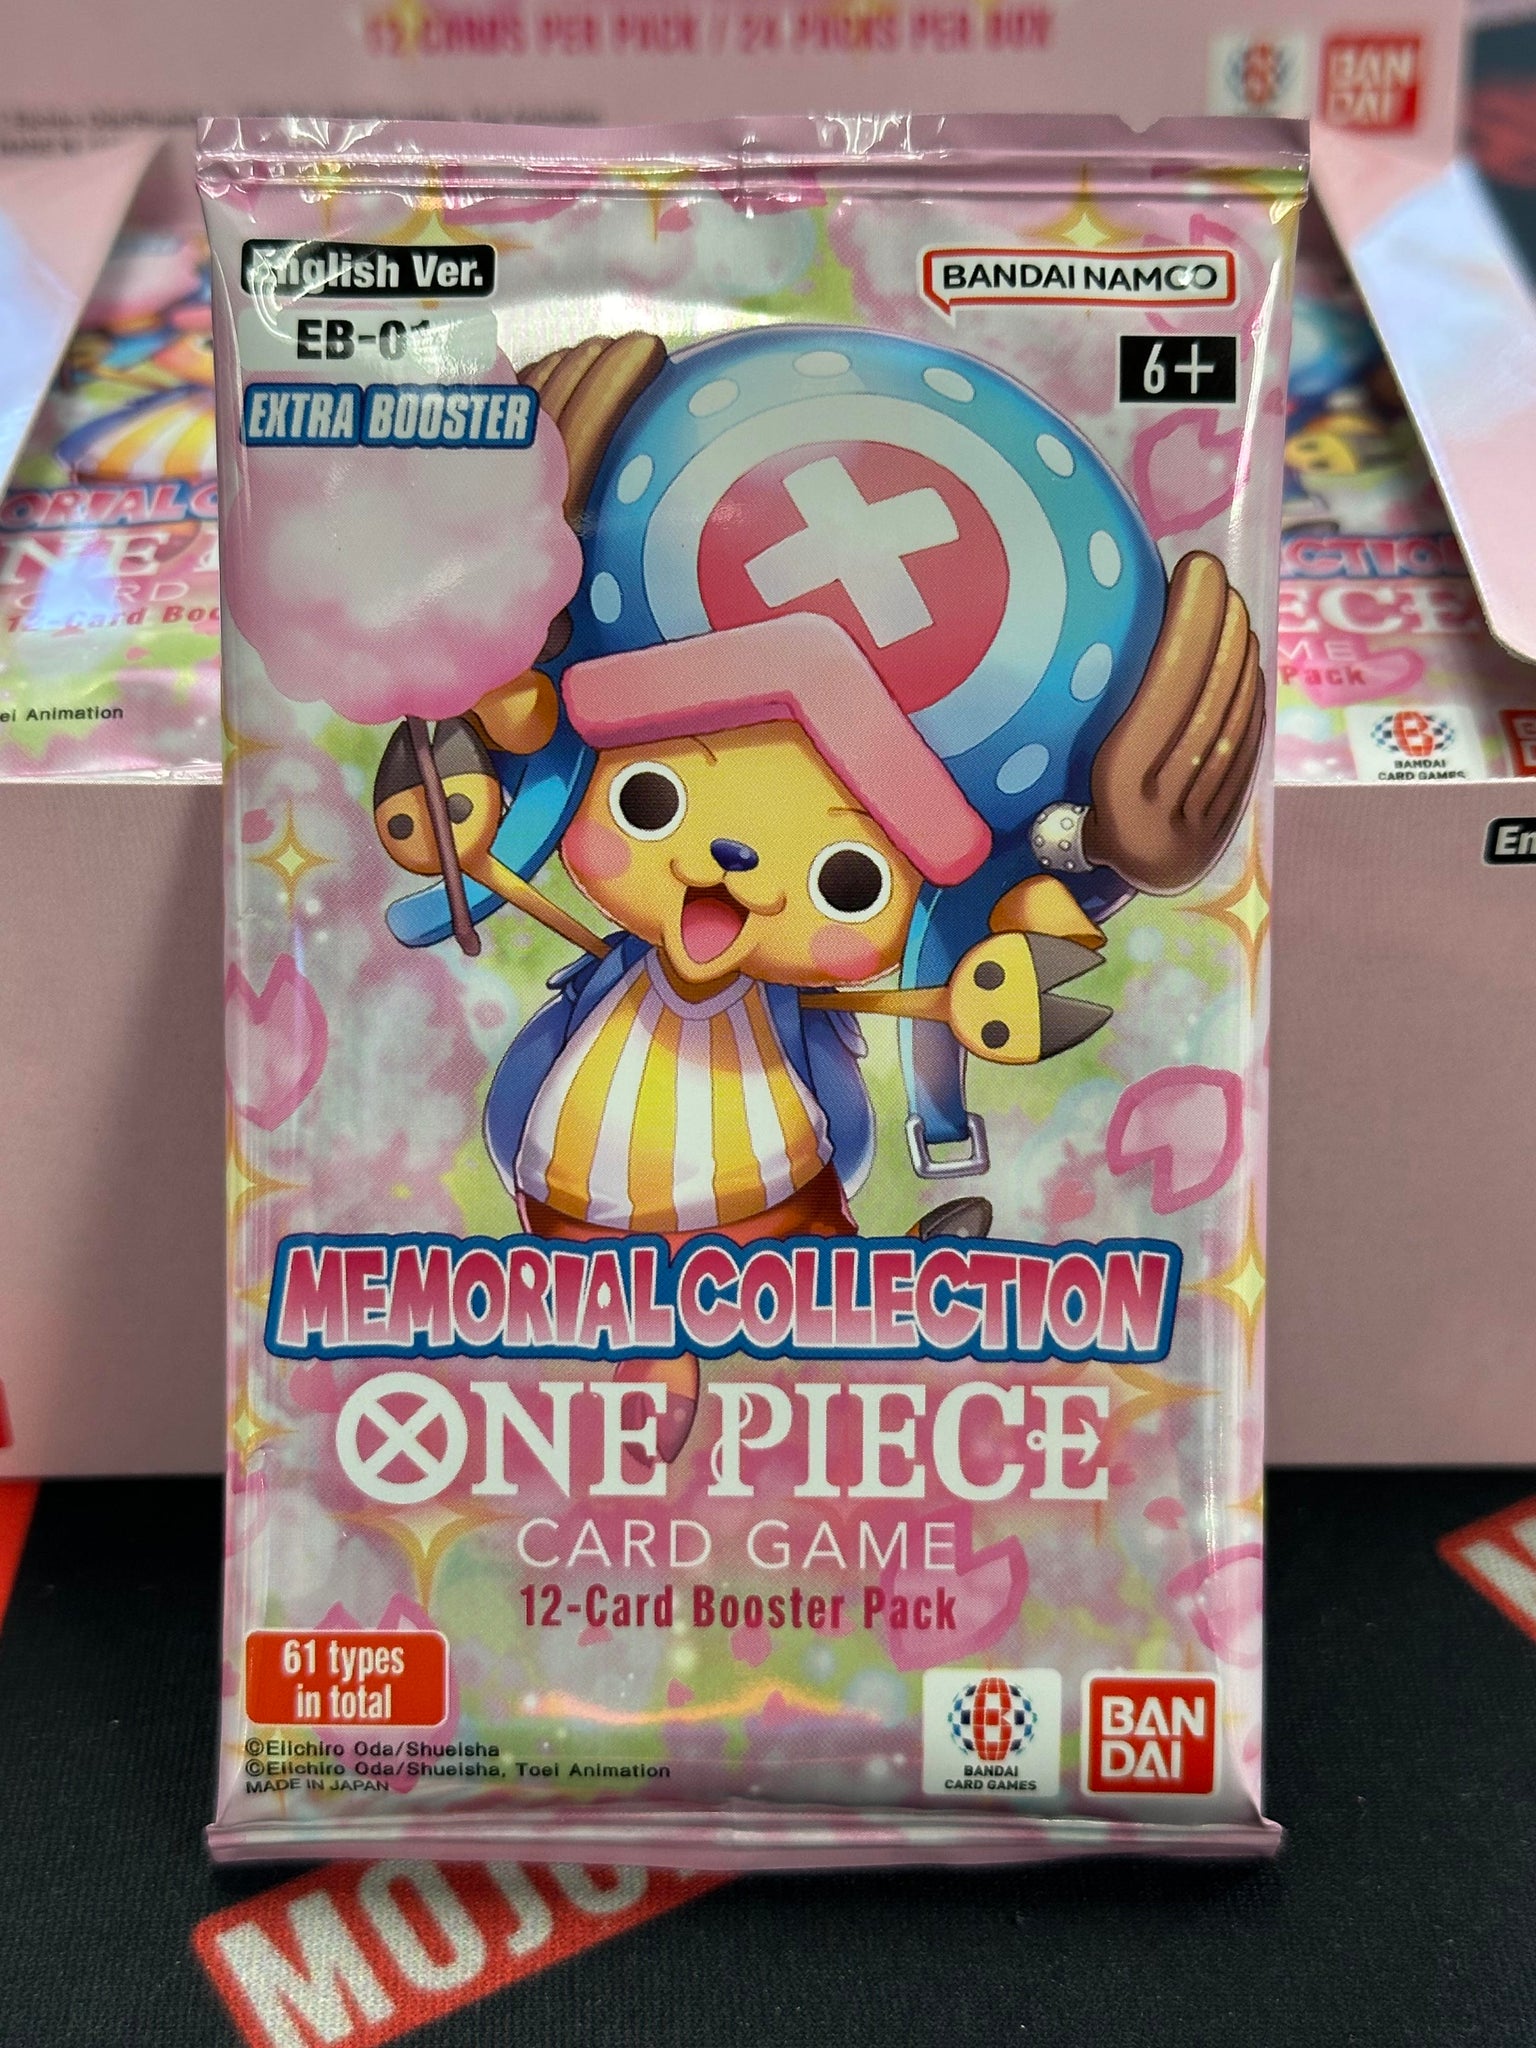 One Piece: Memorial Collection Single Pack EB-01